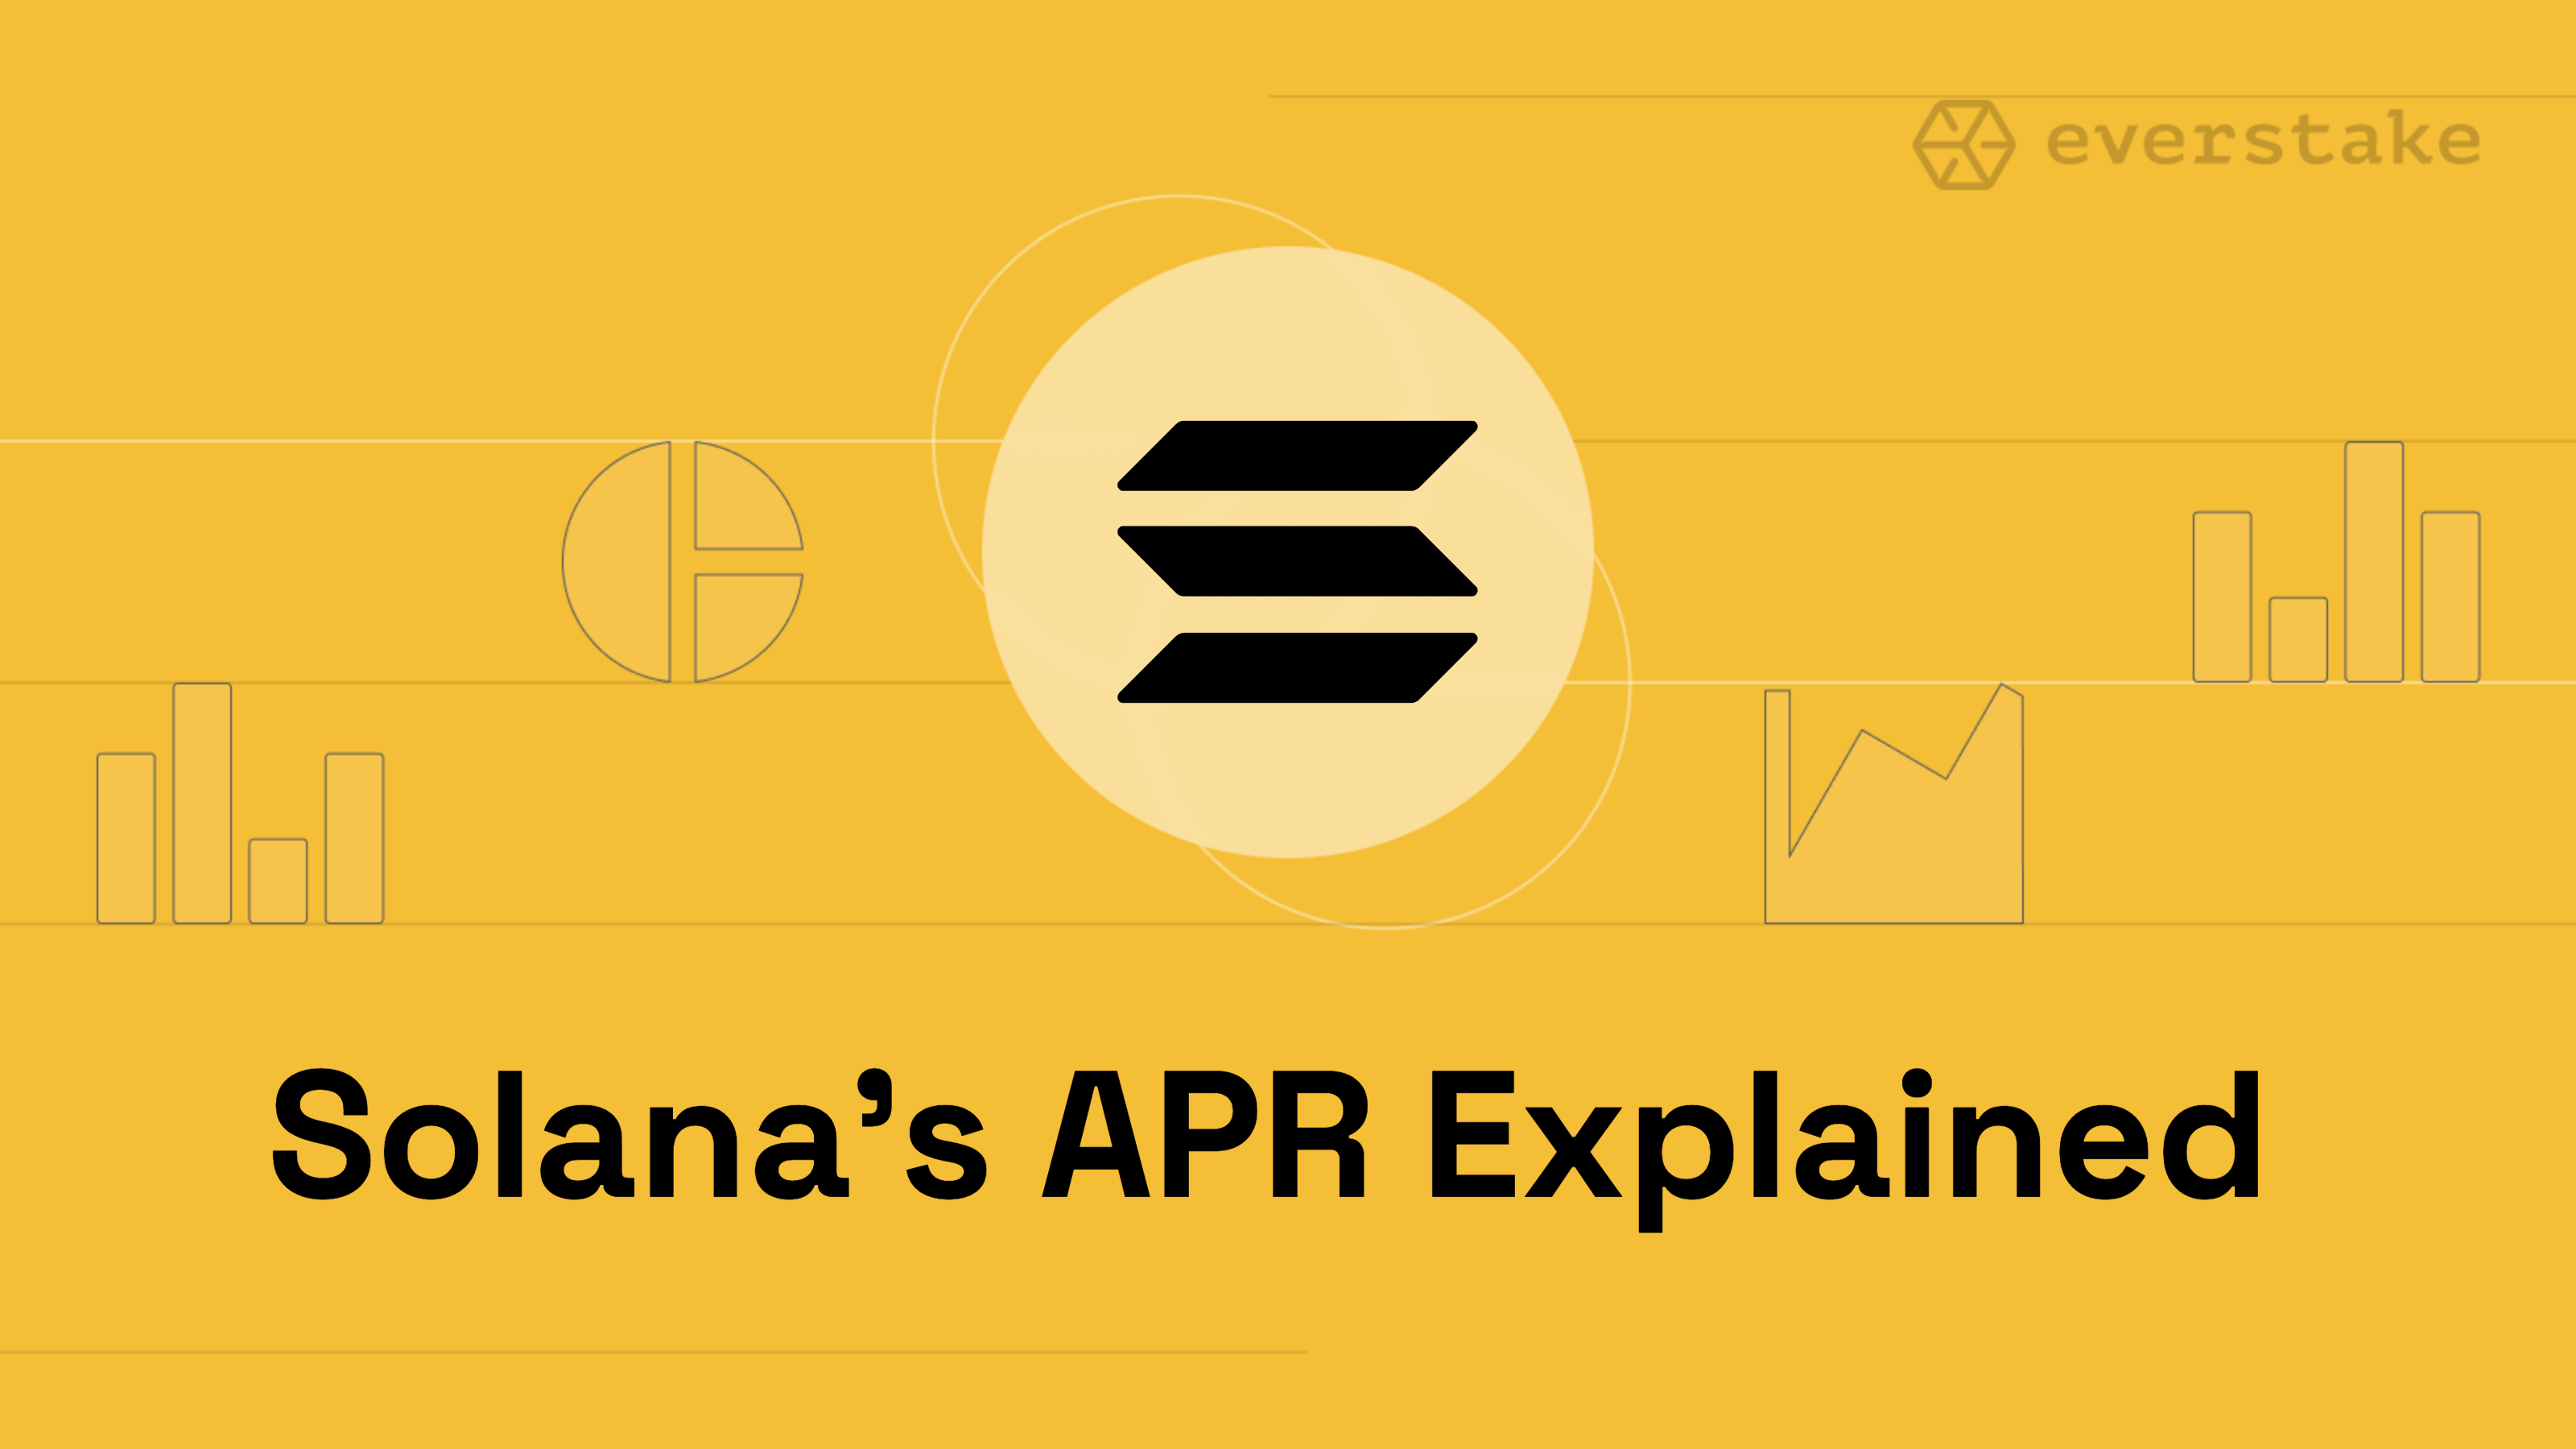 What Affects APR in Solana